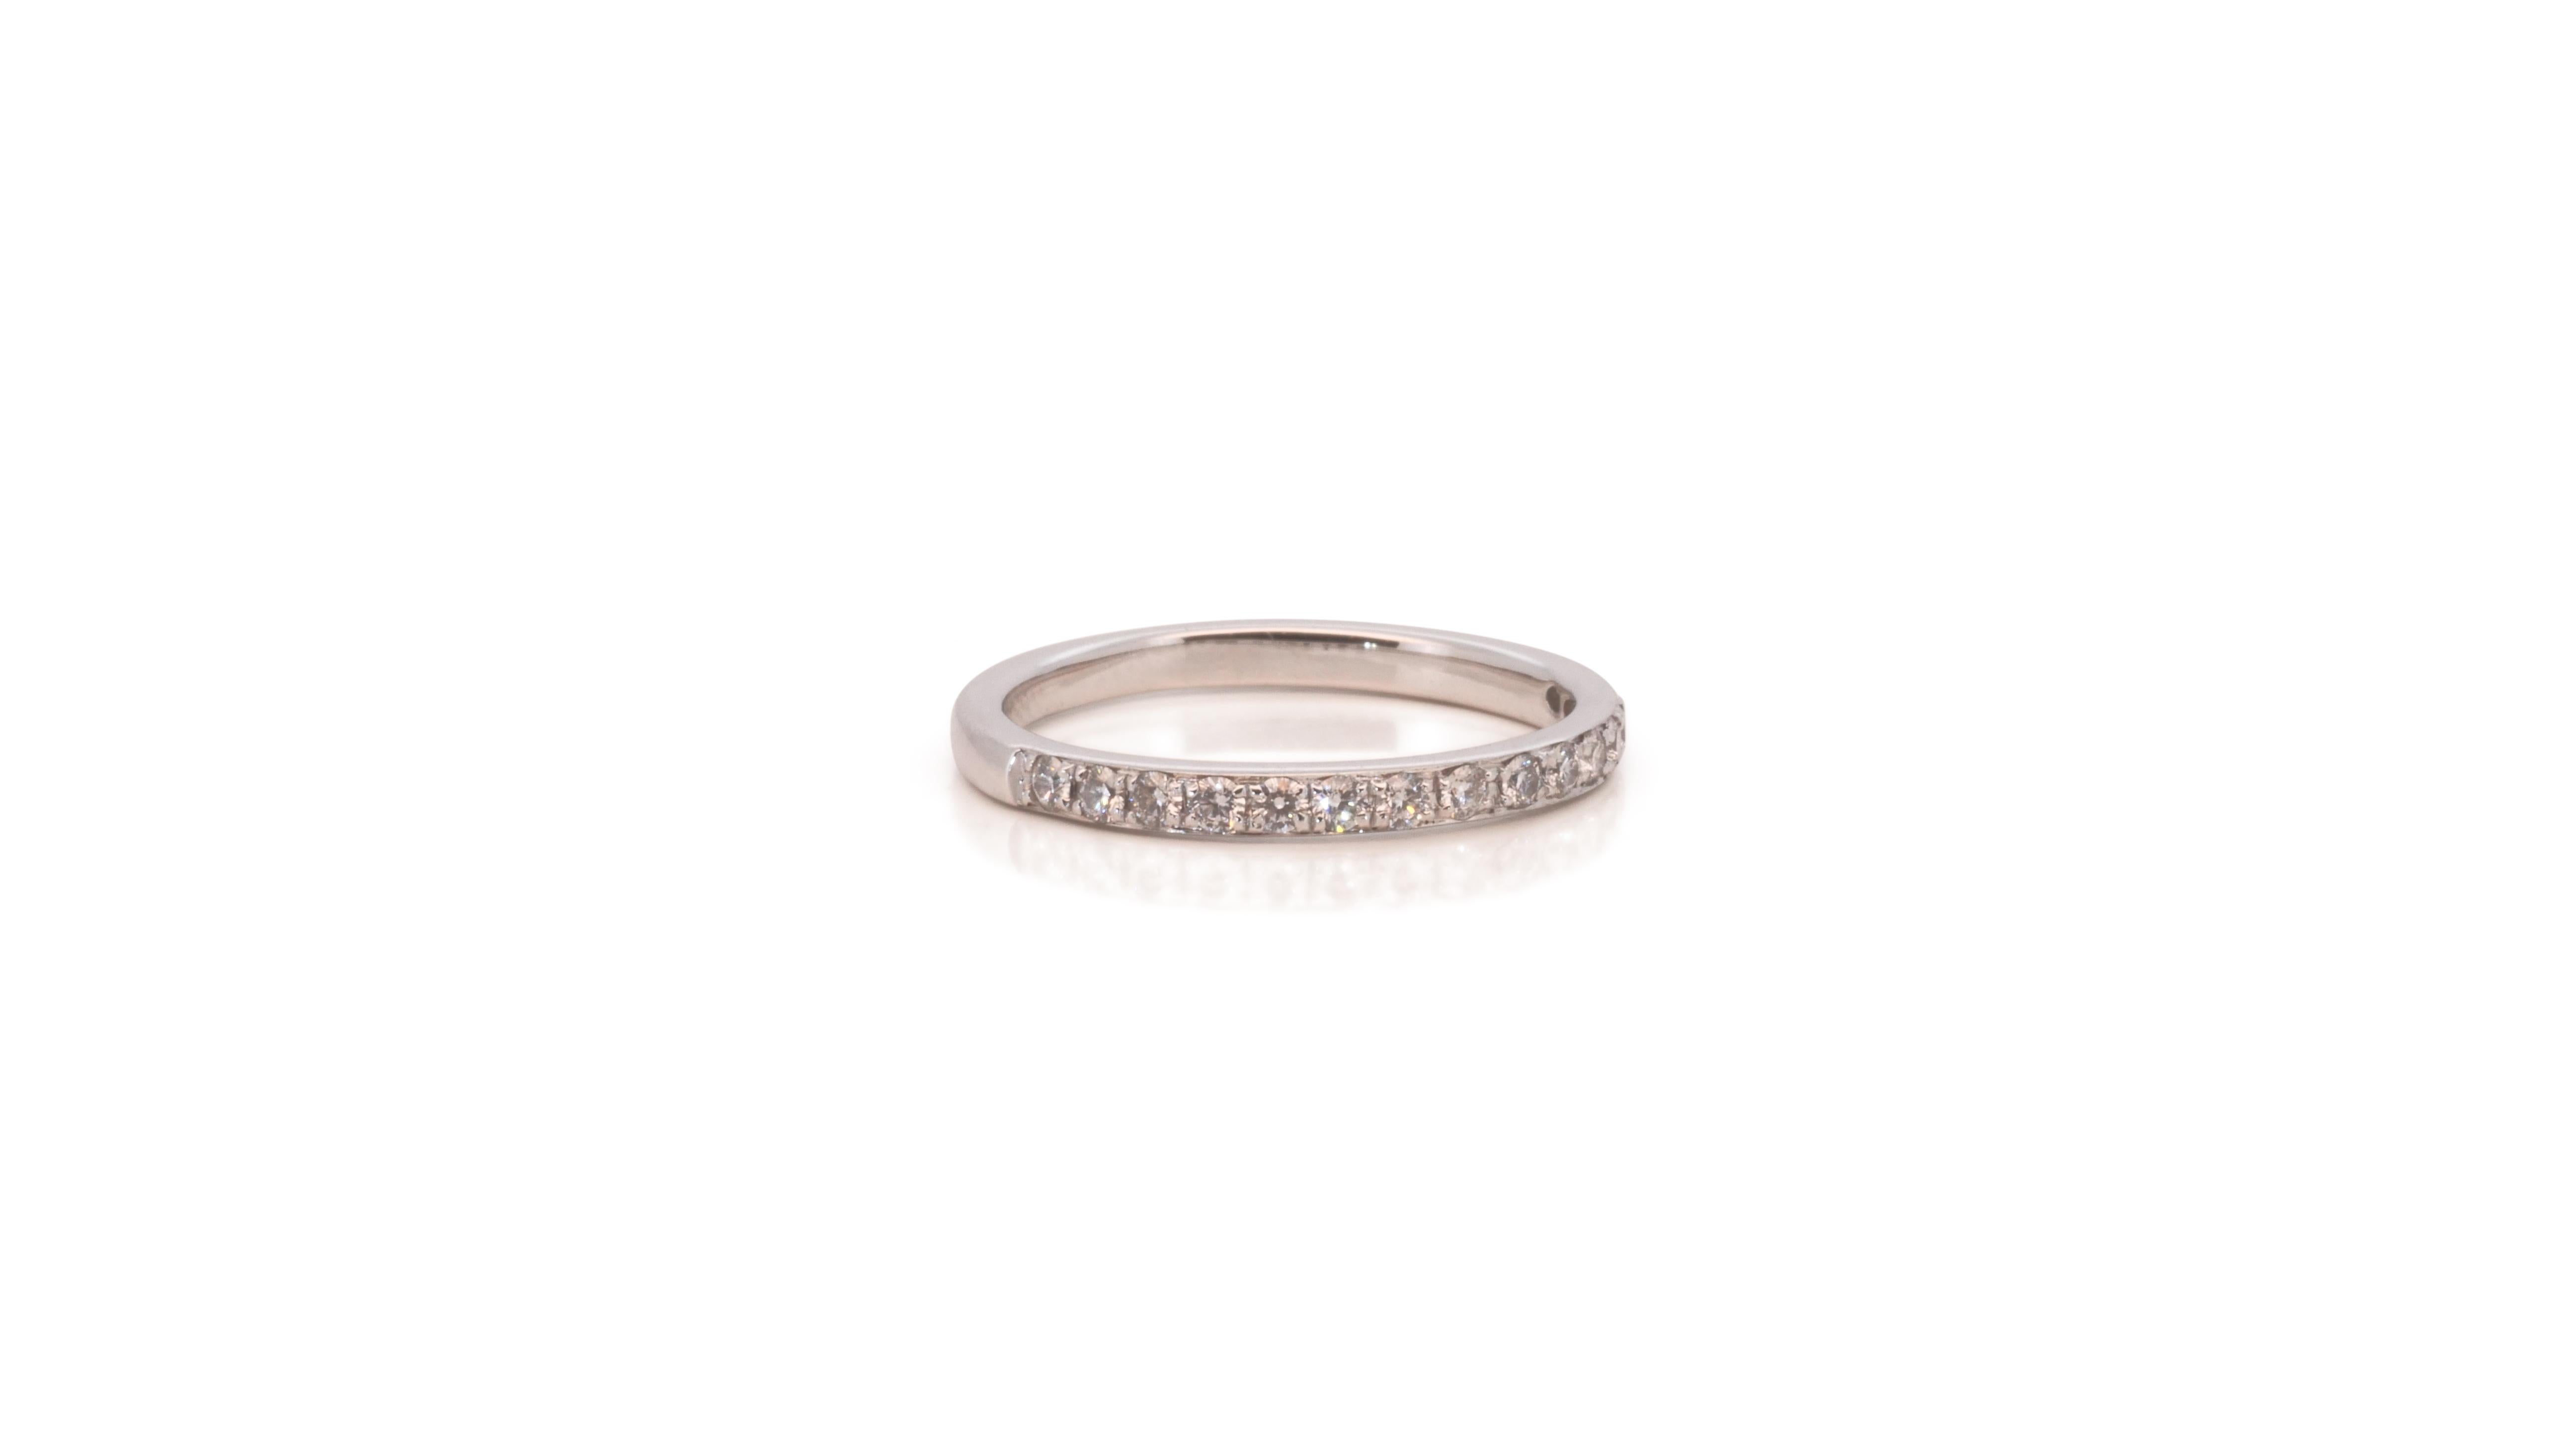 A gorgeous pave thin band ring with a dazzling 0.16 carat round brilliant diamonds. The jewelry is made of 18k white gold with a high quality polish. It comes with a fancy jewelry box.

16 diamonds main stone total of: 0.16 carat
cut: round